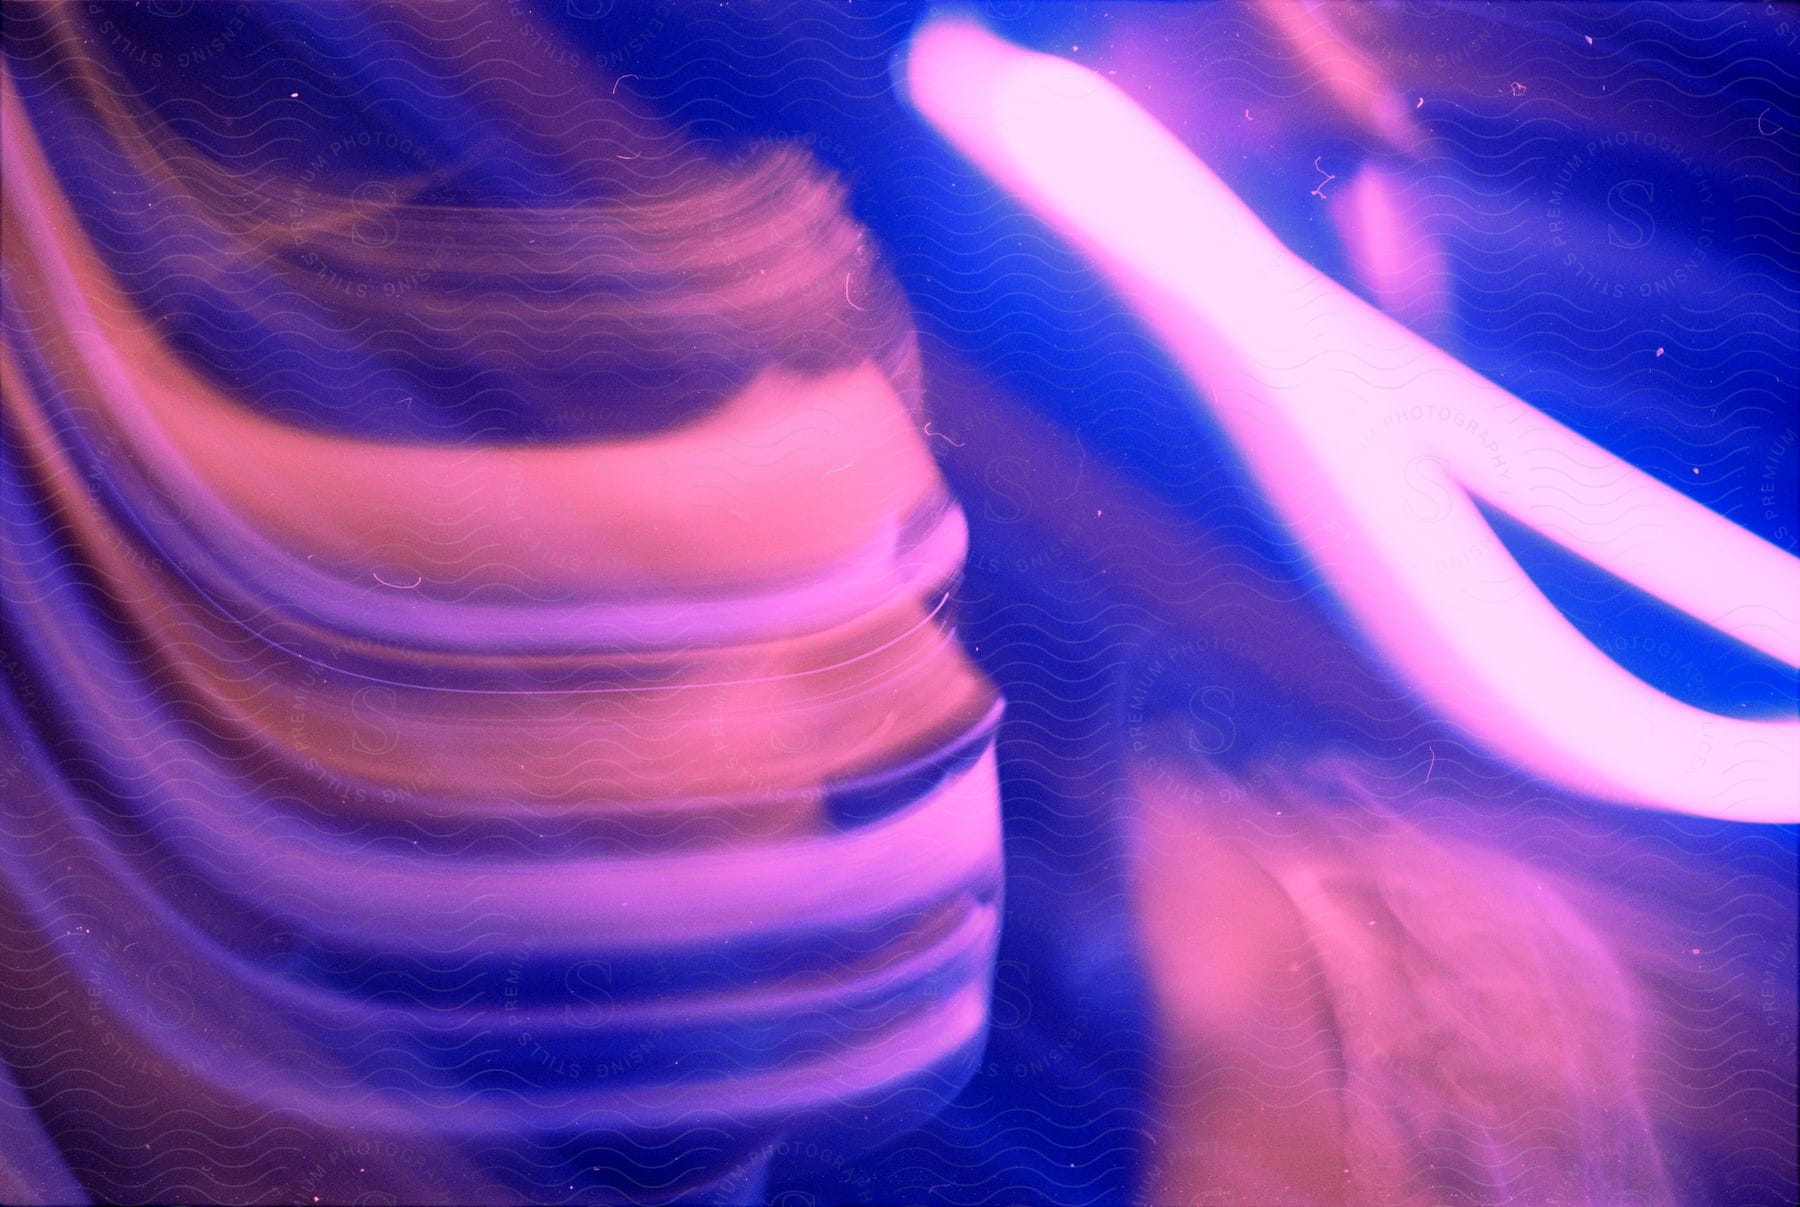 Blurred face surrounded by blue and pink light streaks in a nighttime interior setting